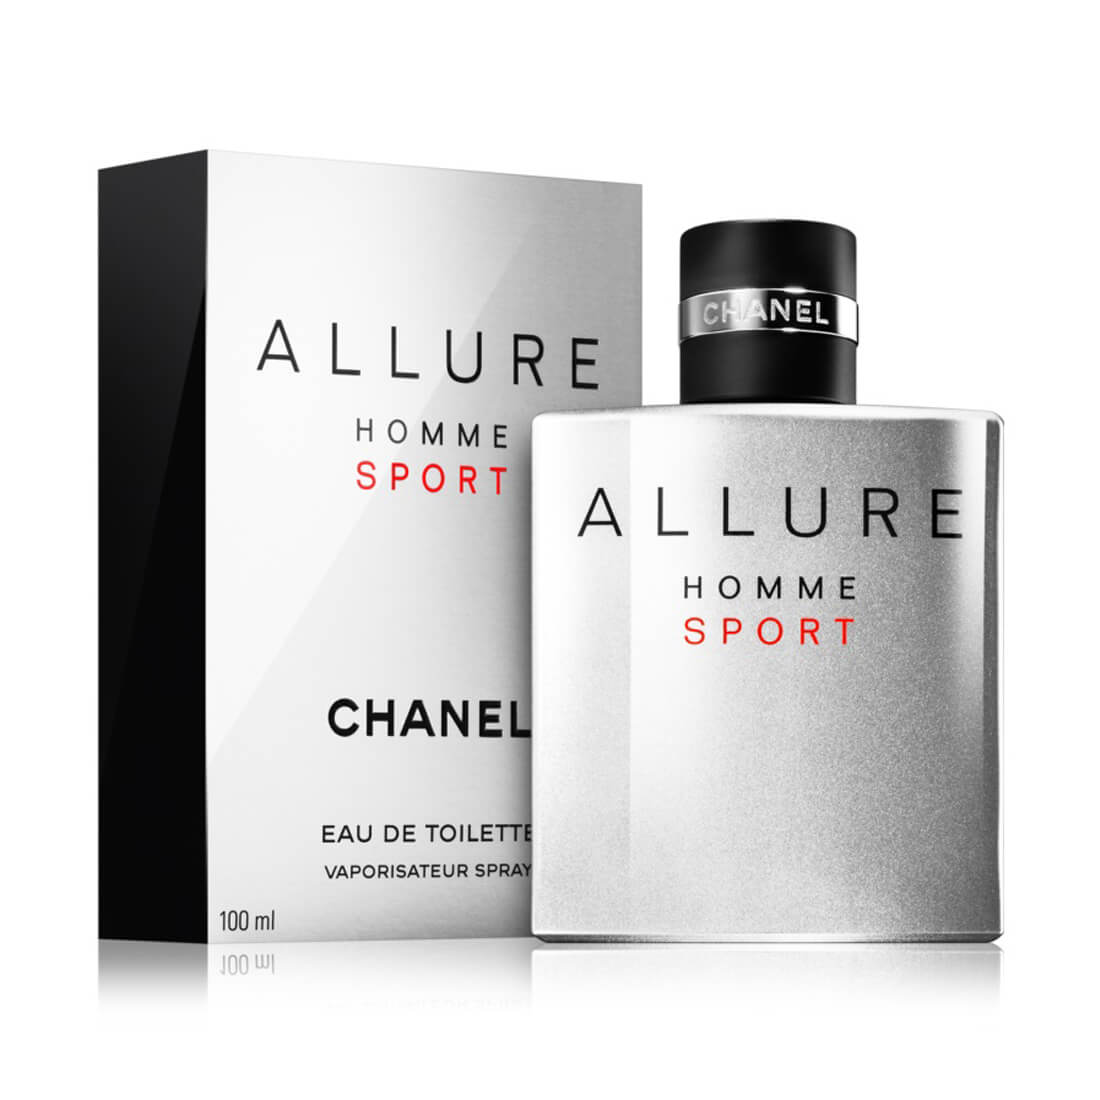 Review of Chanel's Allure Homme Sport Cologne